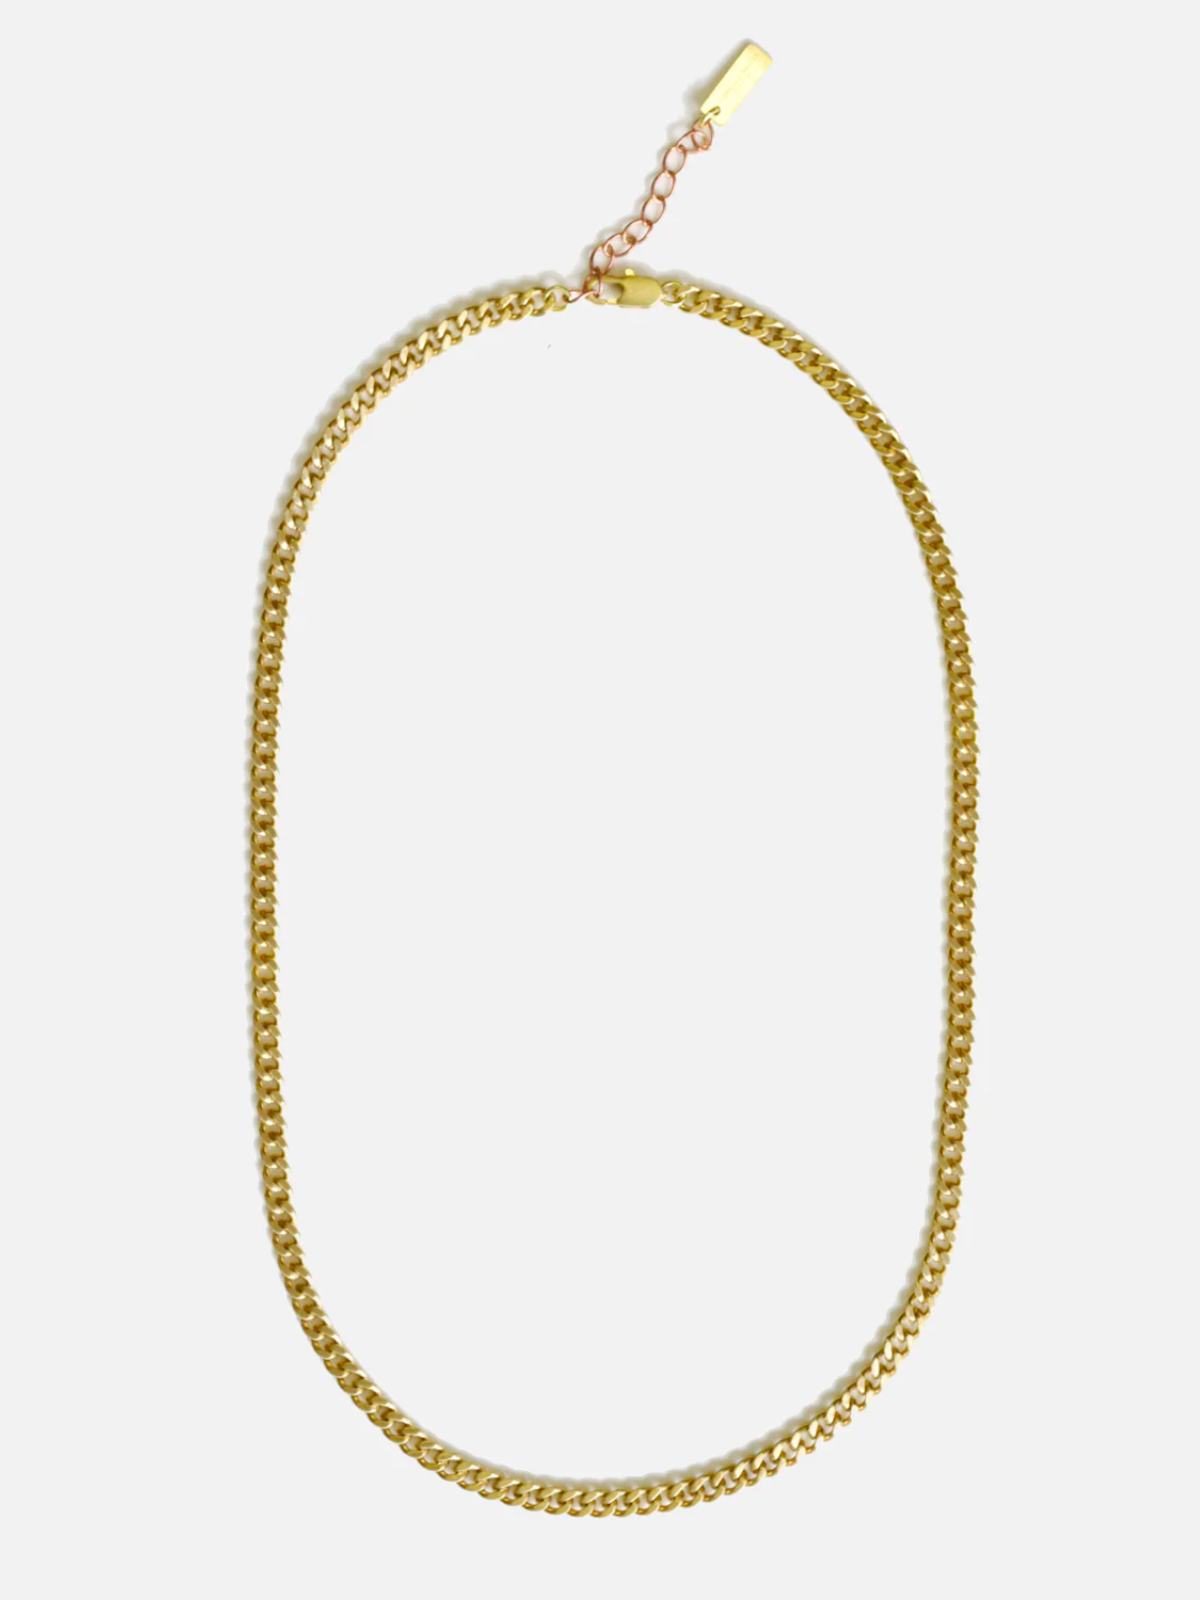 curated basics 5mm brass curb cuban flat chain necklace gold tone metal kempt athens ga georgia men's clothing jewelry store